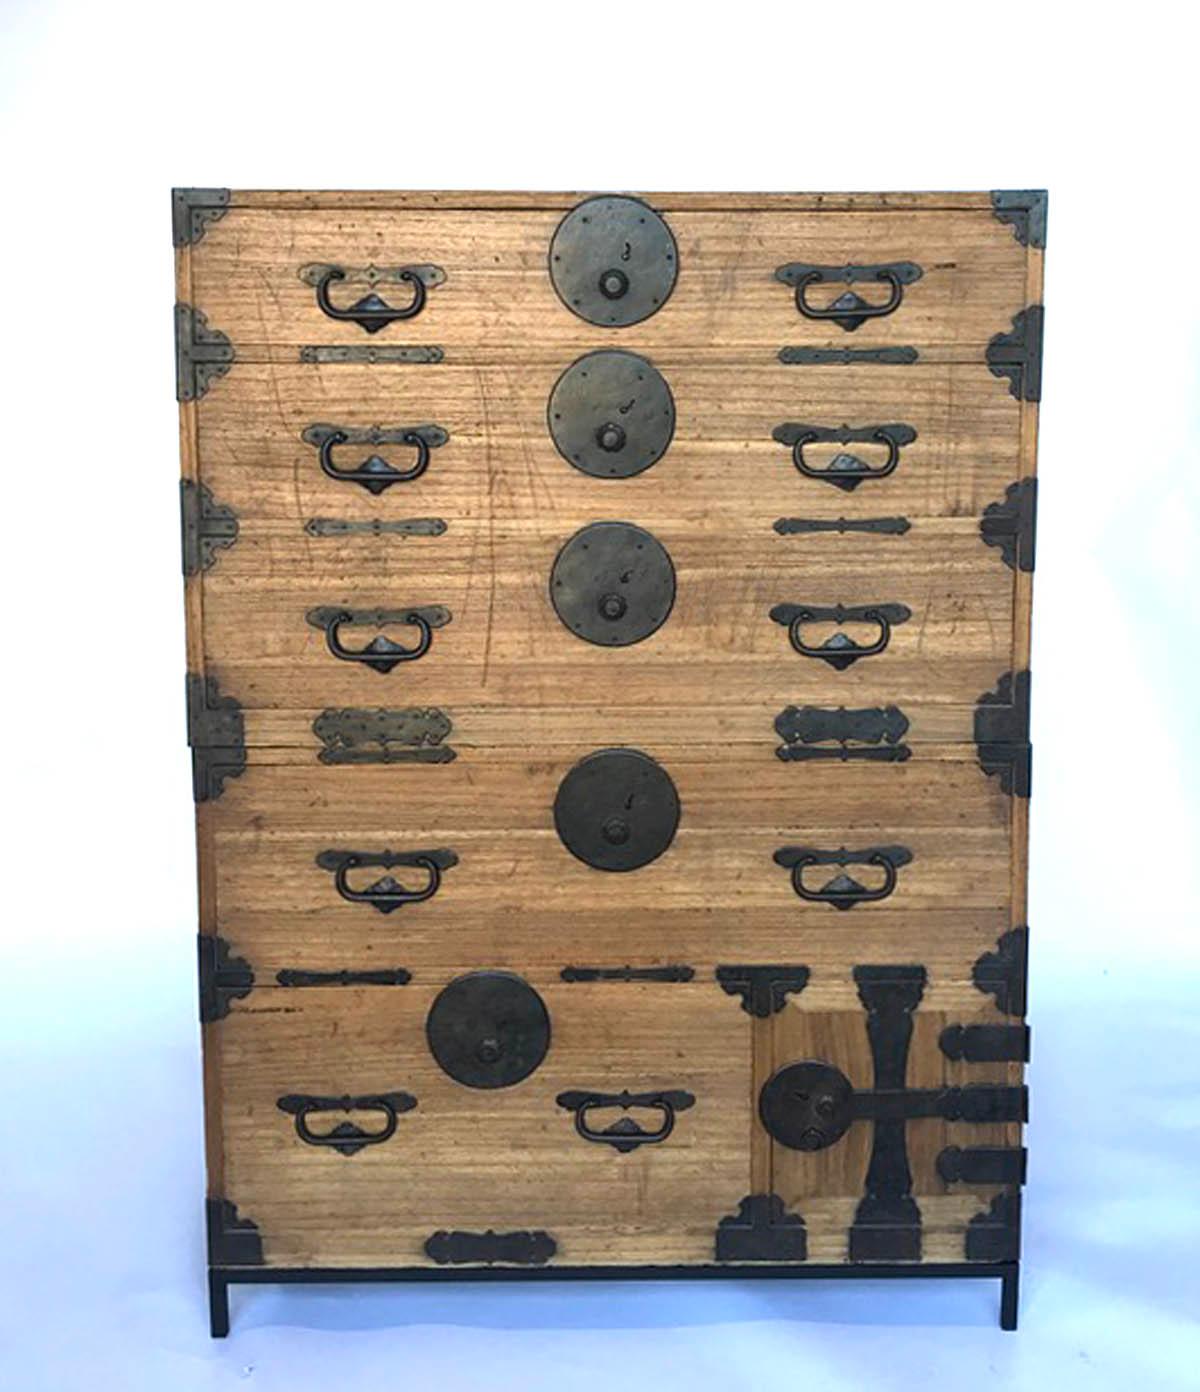 Very functional, hinoki wood Japanese tansu on custom iron base. This tansu has five drawers and one small compartment with shelf. All original. Works as a chest of drawers or can be separated and used as nightstands or side tables. Smoothly working